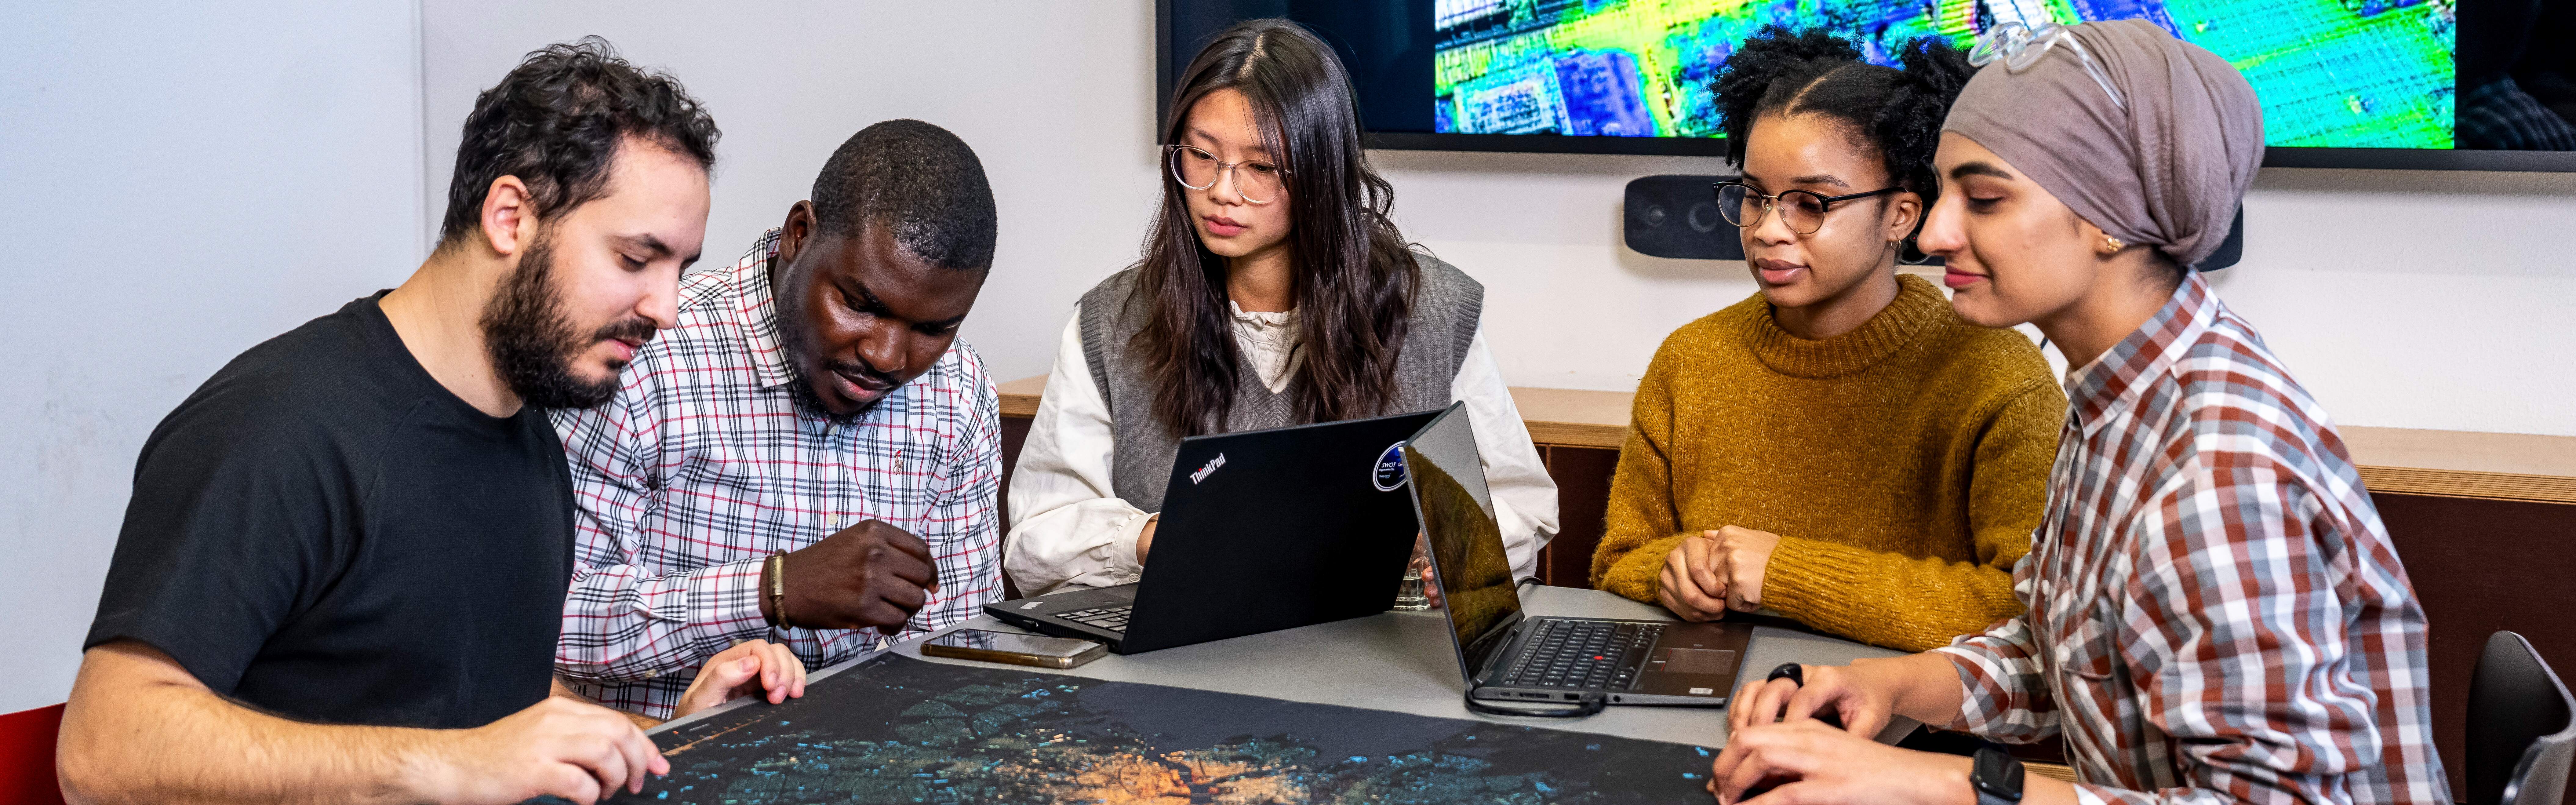 Several students sit together at a table and look at a map or a satellite image of a city from above. In the background is a screen on the wall showing a thermal image of a city from above.